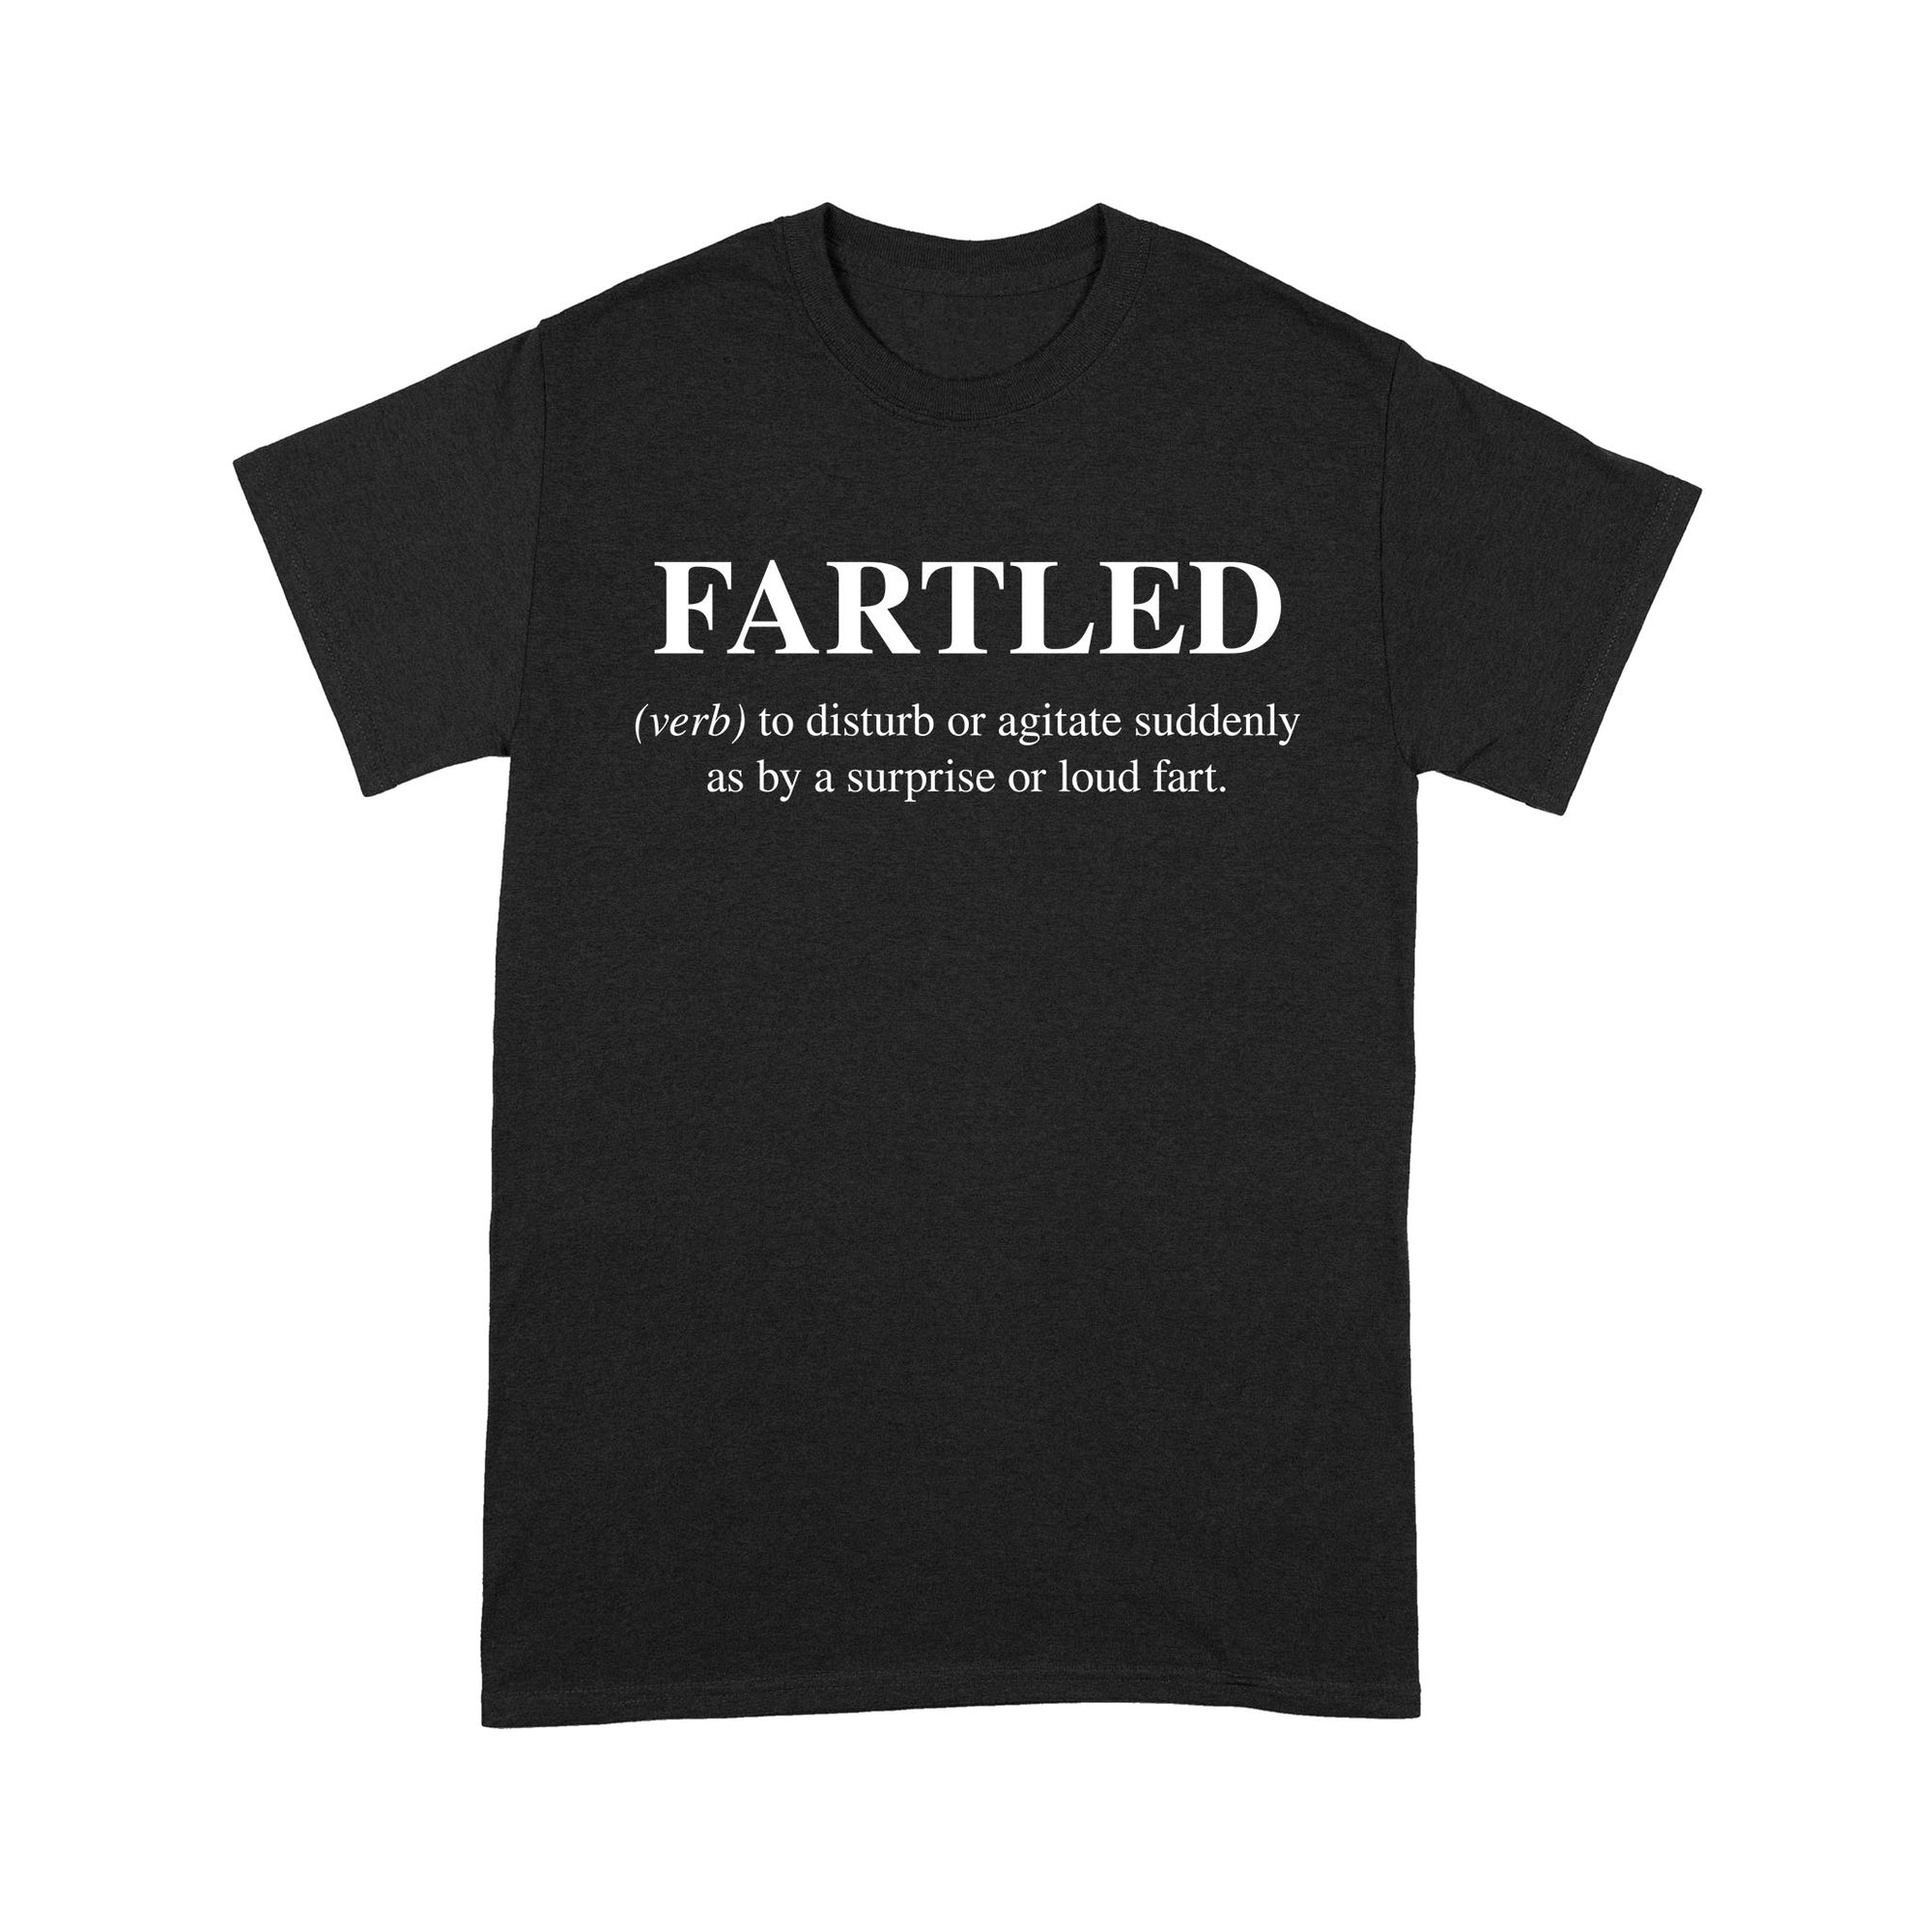 Fartled To Disturb Or Agitate Suddenly As By A Surprise Or Loud Fart Funny Gift Ideas for Men Husband Dad Boyfriend - Standard T-shirt